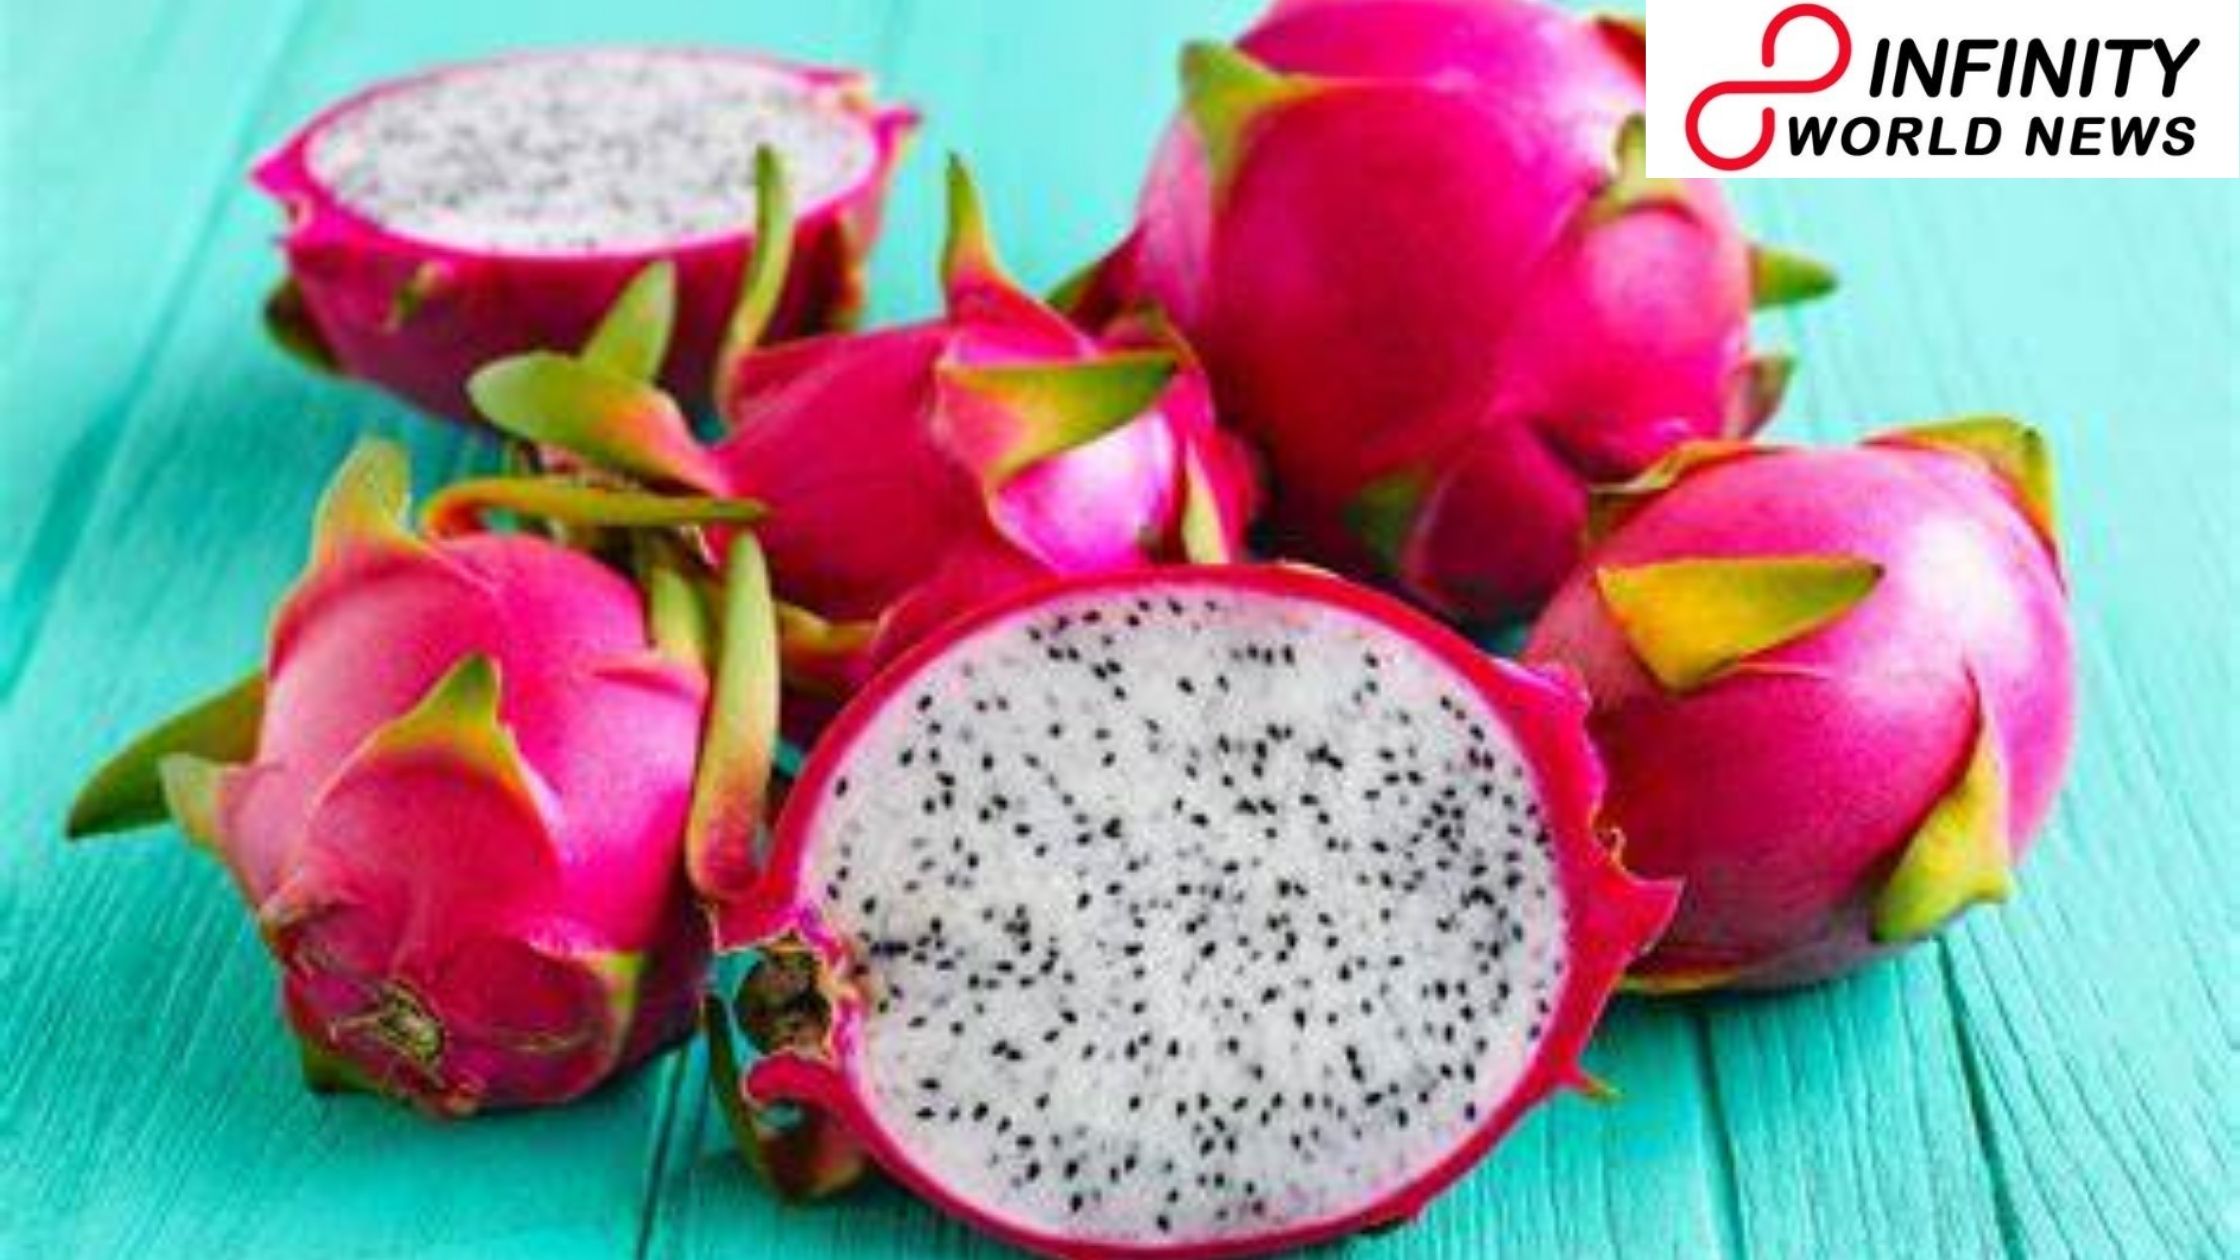 UP to Hold Dragon Fruit Festival to Boost Organic Farming in the State